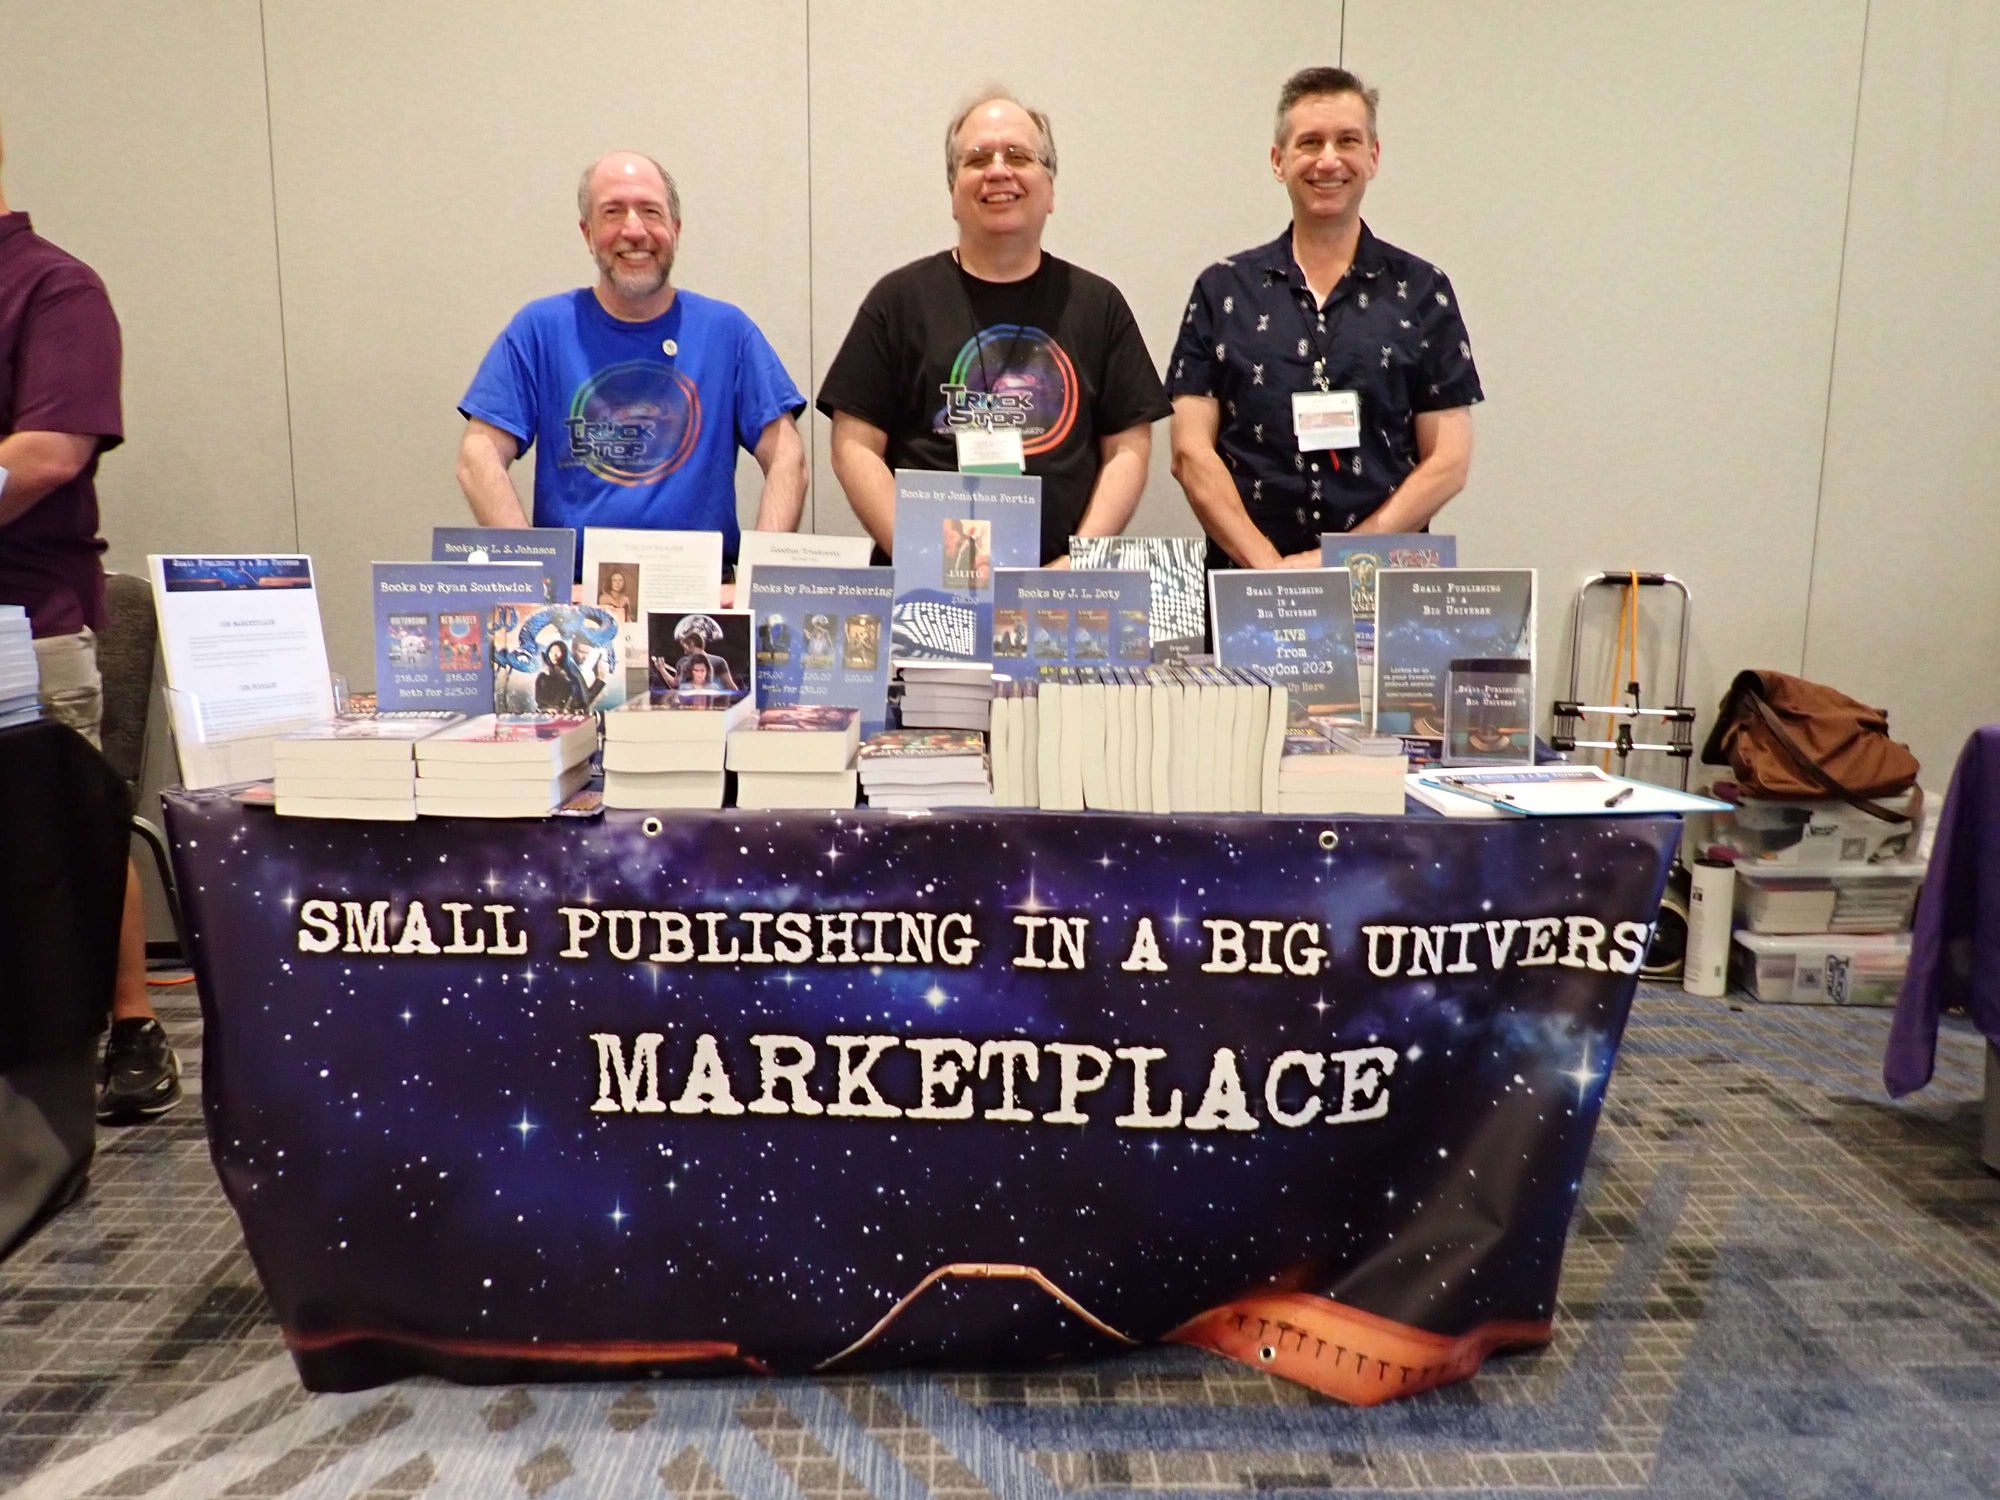 3 authors standing behind a table of books: "Small Publishing in a Big Universe Marketplace"